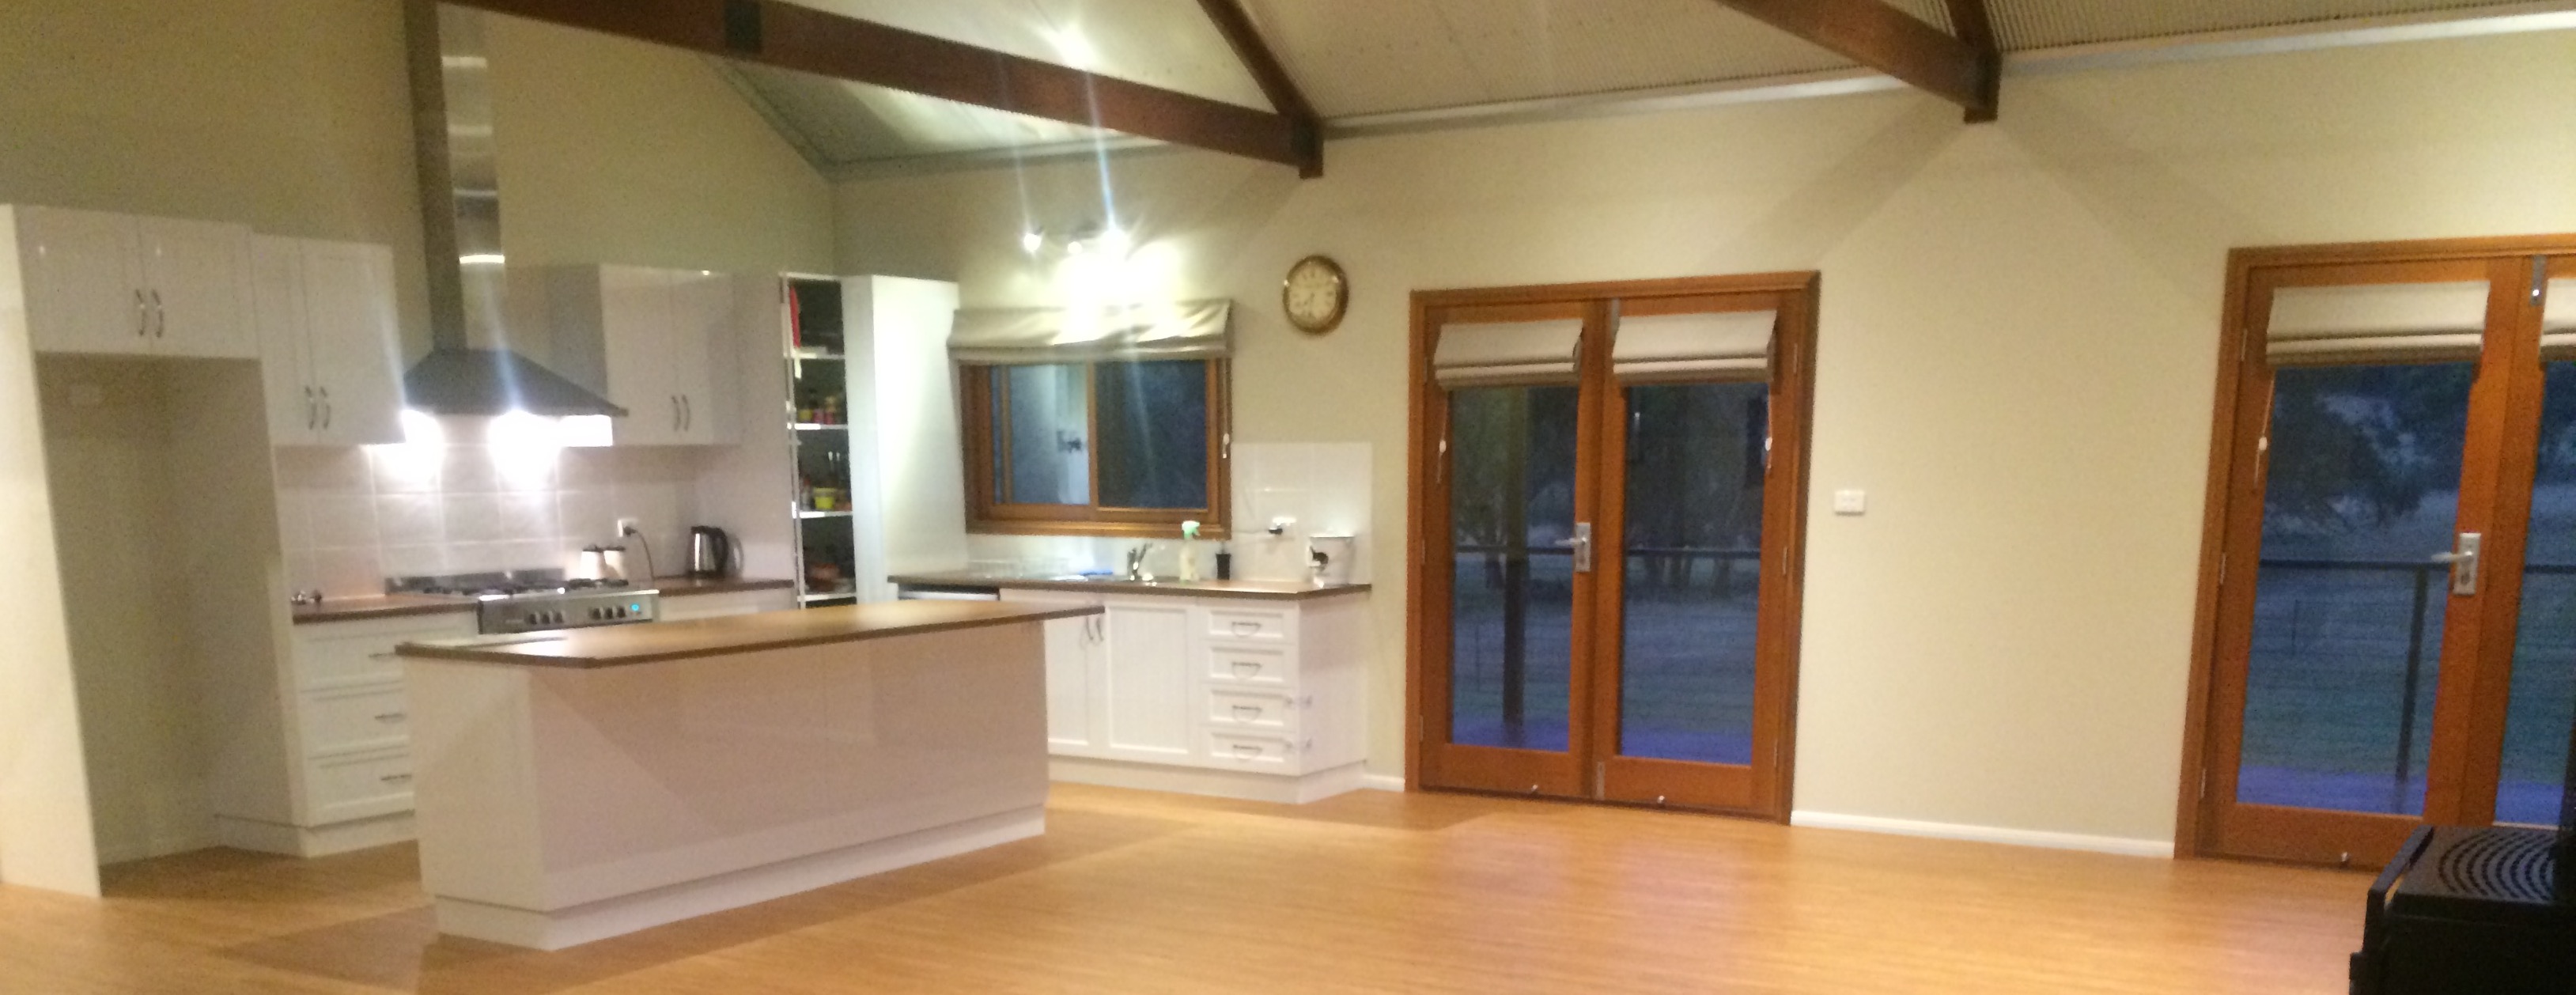 French Doors and Sliding Window